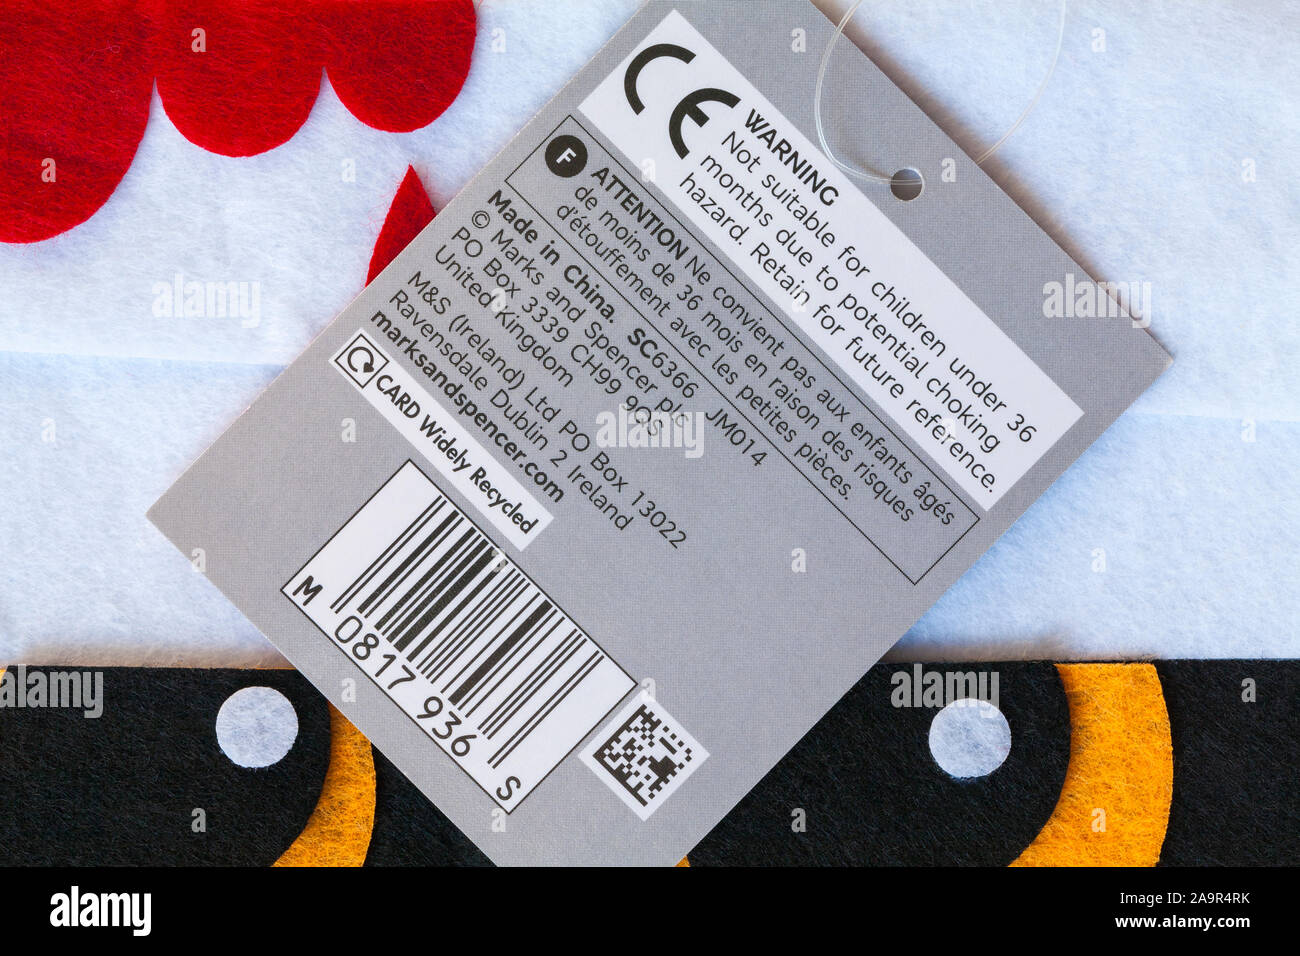 Tag with warning and CE marking symbol on M&S Treat Bags for Halloween Made in China Stock Photo